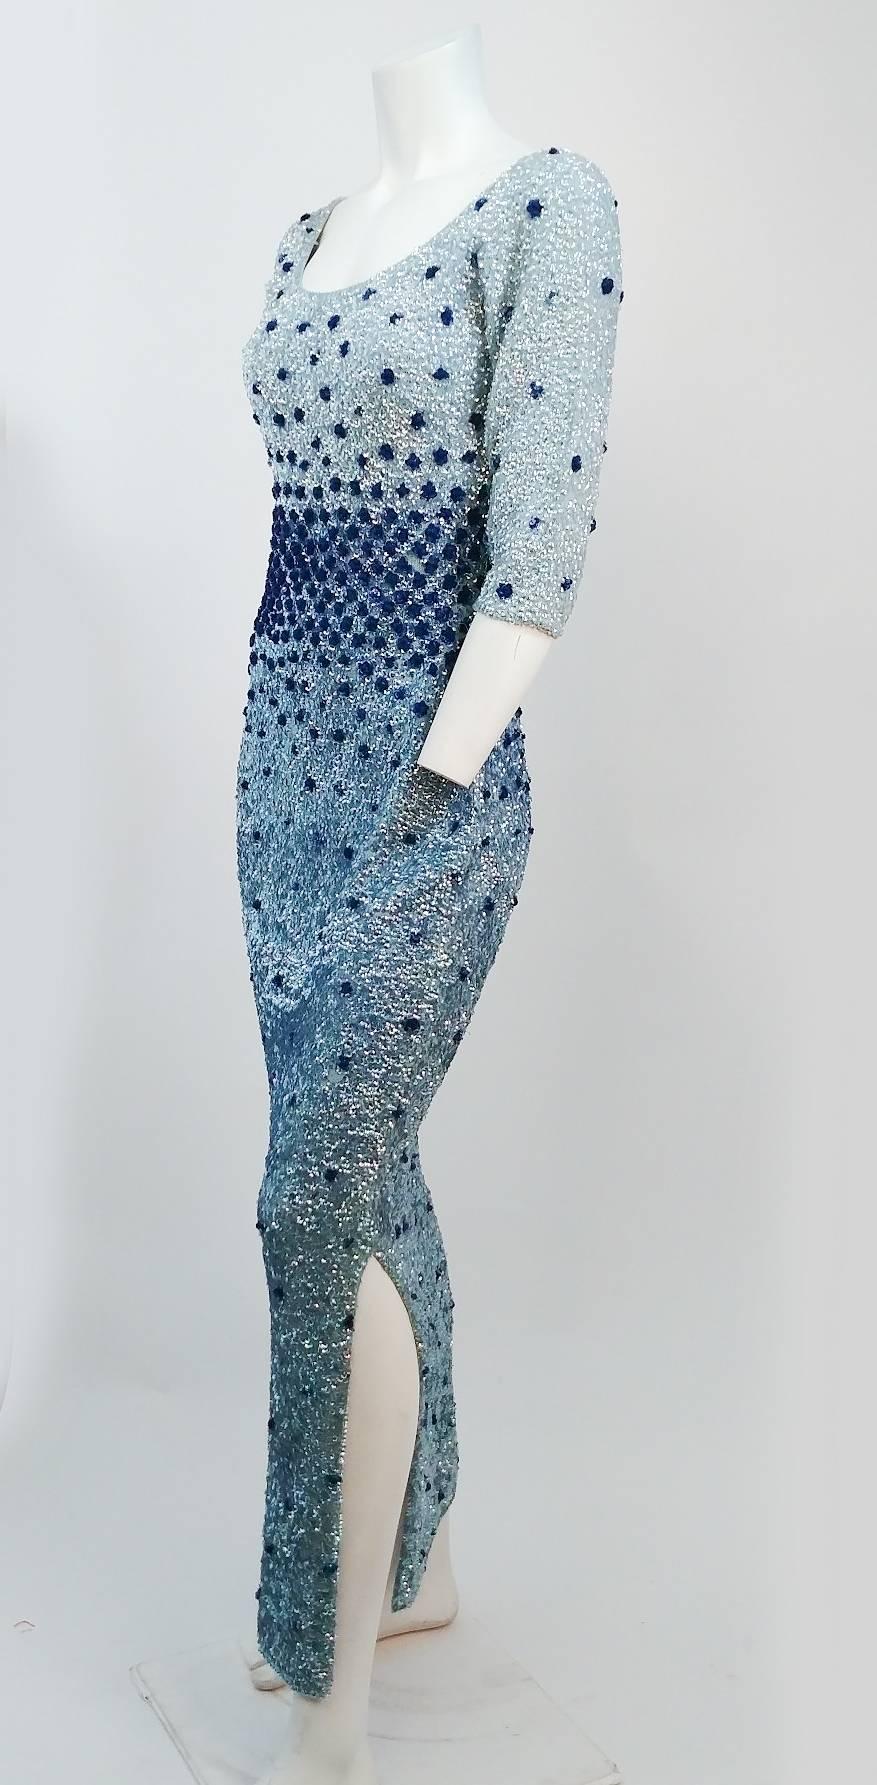 60s Blue Sequin Cocktail Dress. Hand embellished all over sequins in iridescent light blue, with three dimensional roses in dark blue on a sweater knit dress. Zips up back. On side slip on side for ease of walking. 